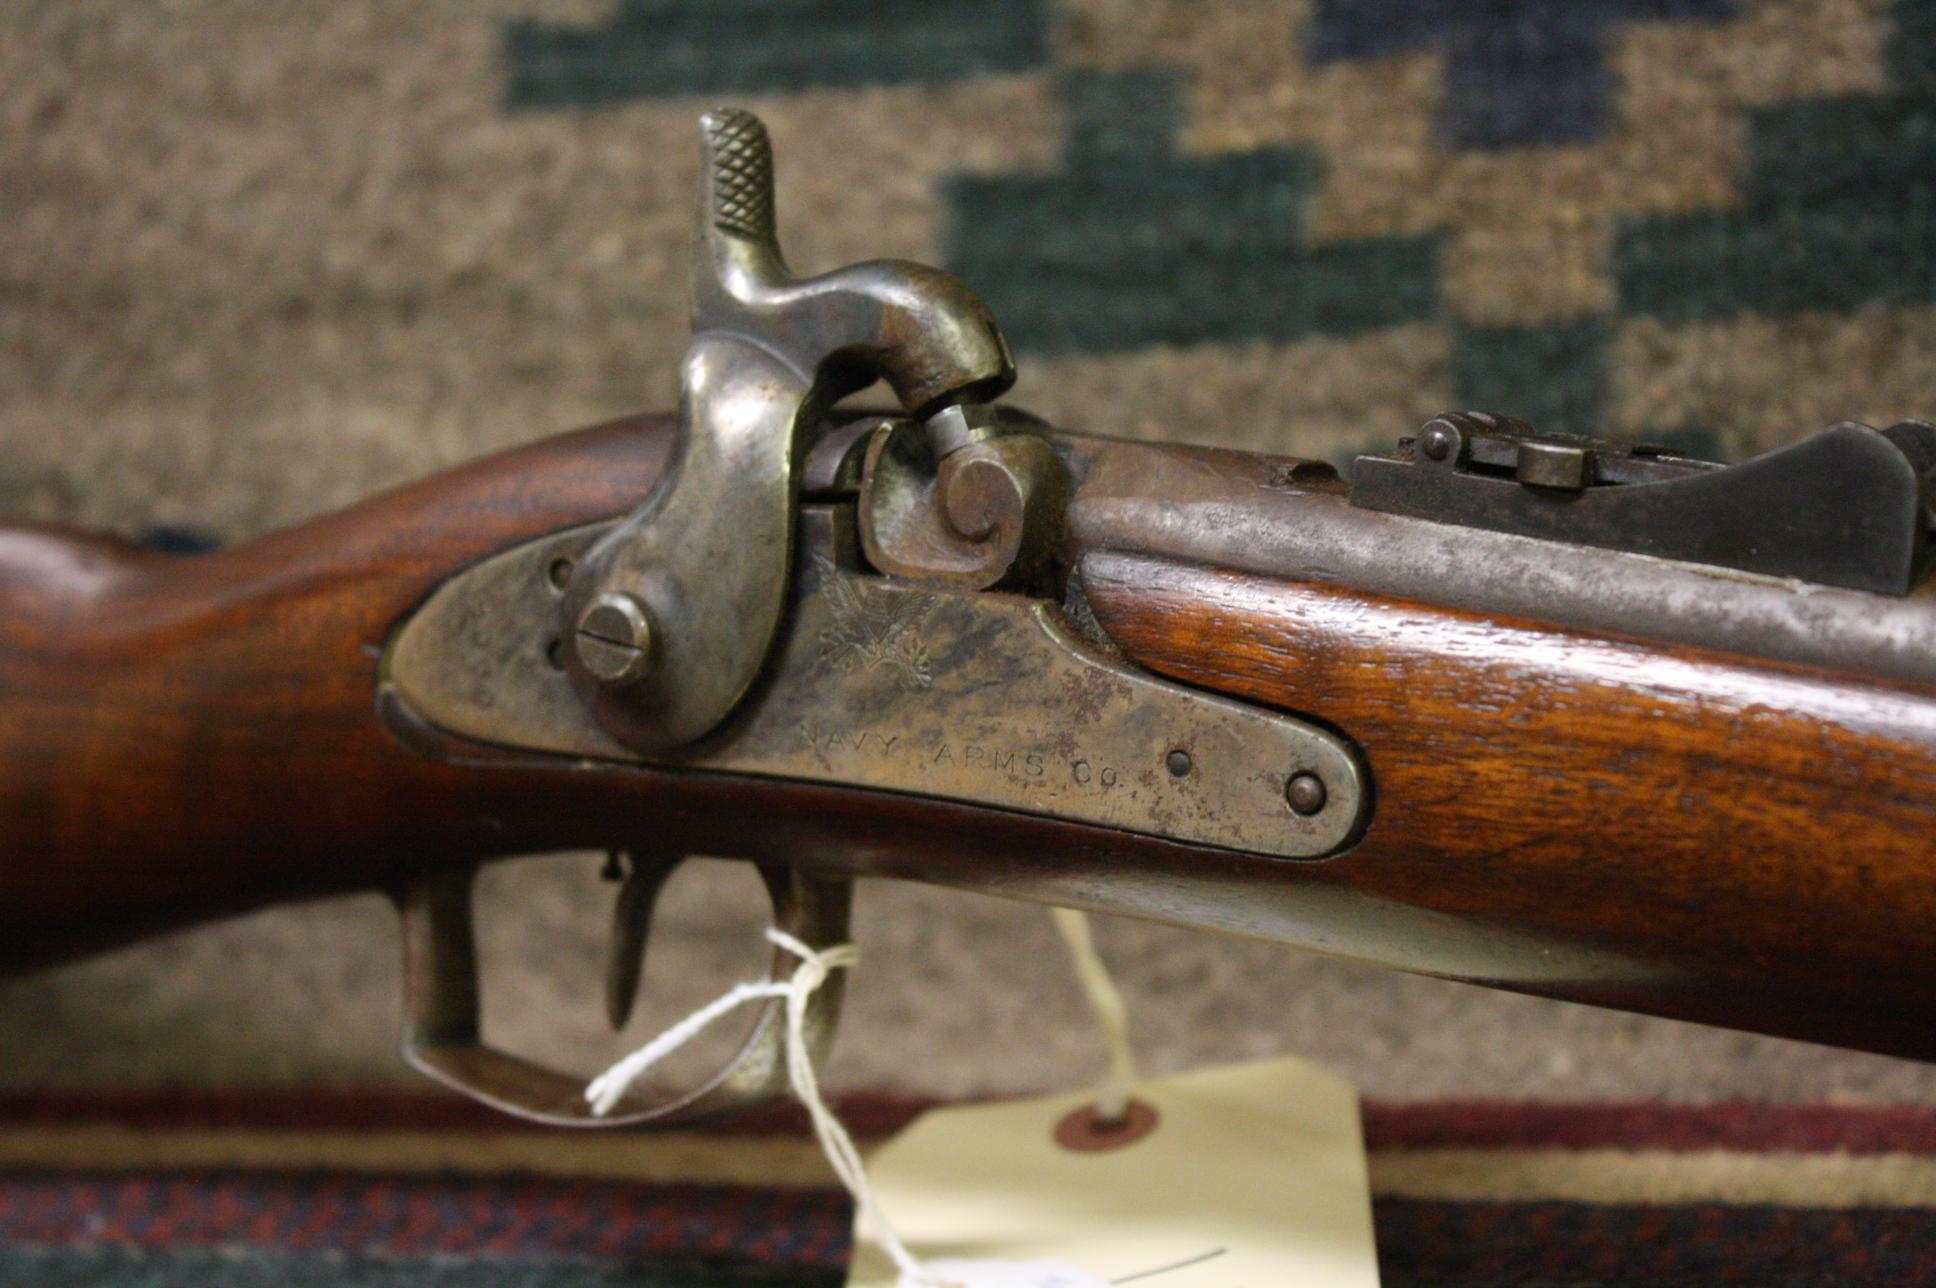 WHITNEY ARMS CARBINE RIFLE